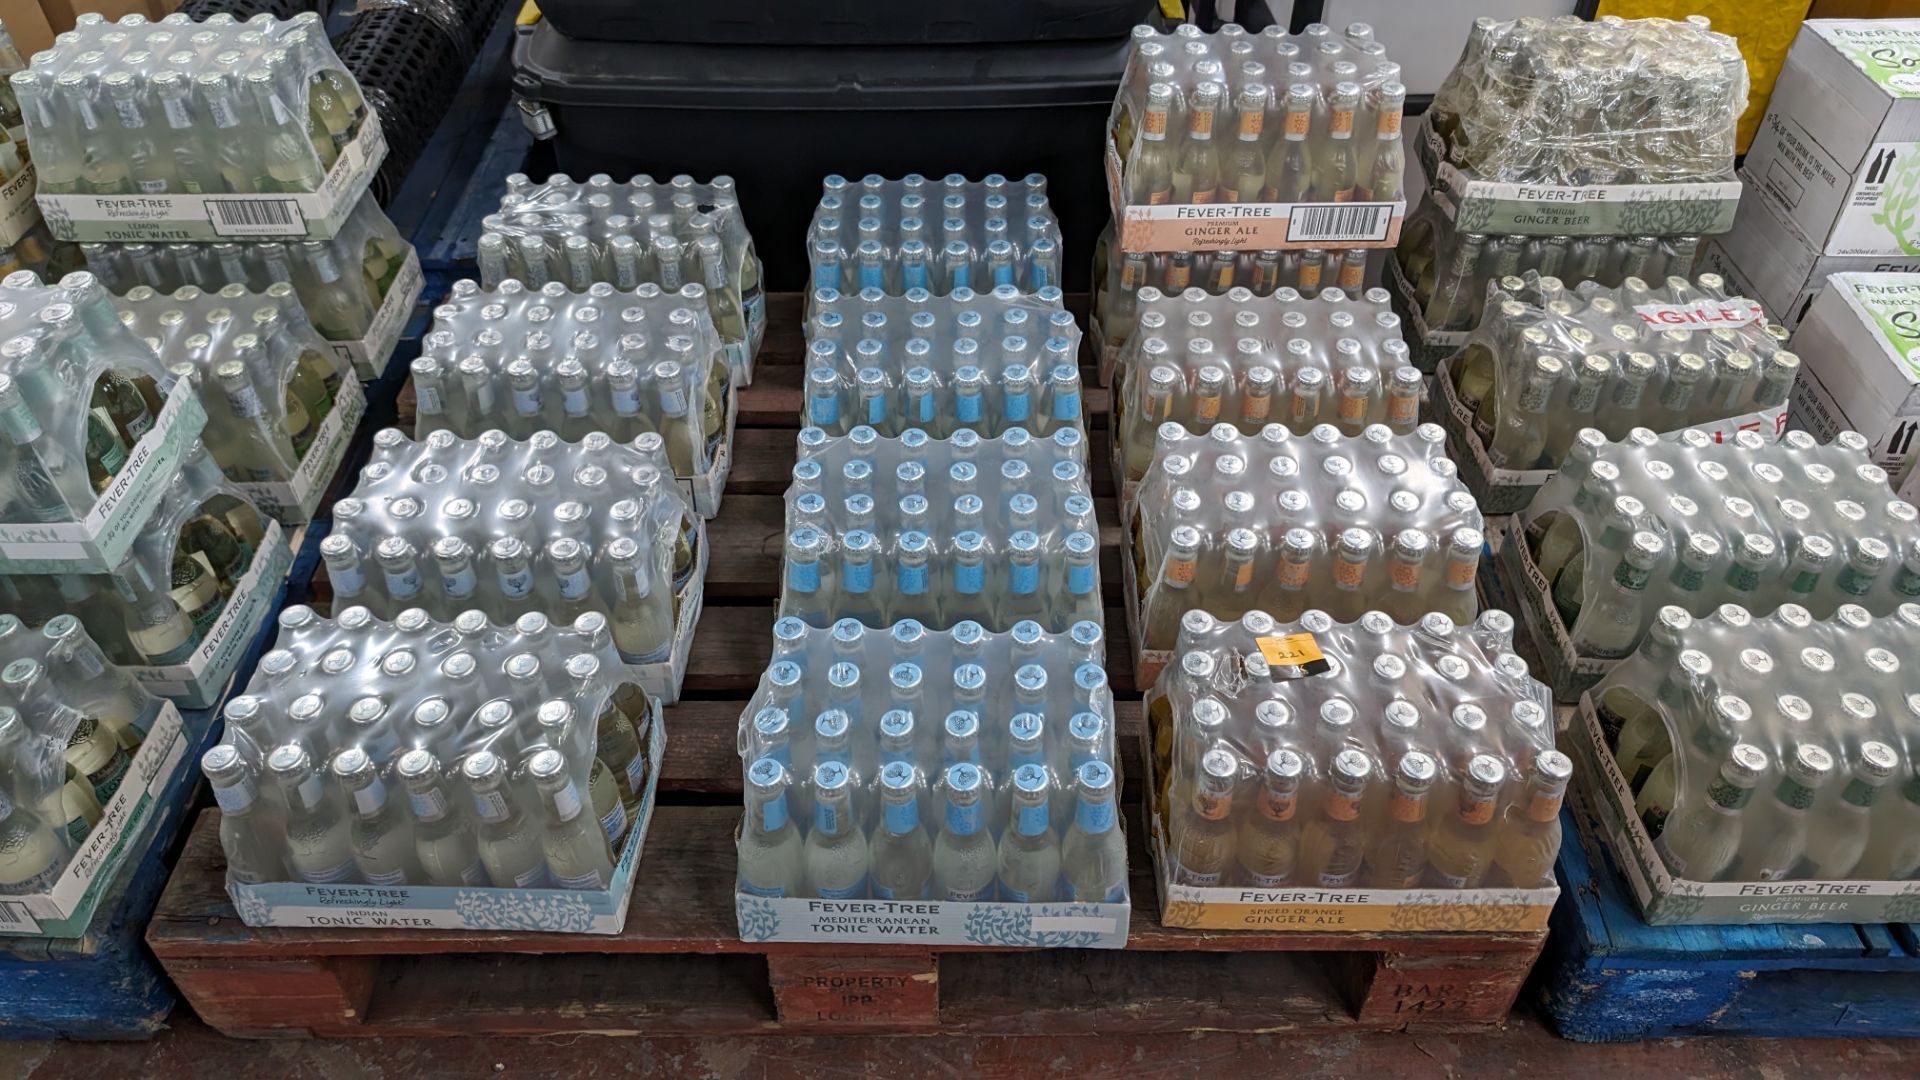 The contents of a pallet of Fever-Tree tonic water comprising 13 trays. NB: The Fever-Tree tonic w - Image 2 of 6